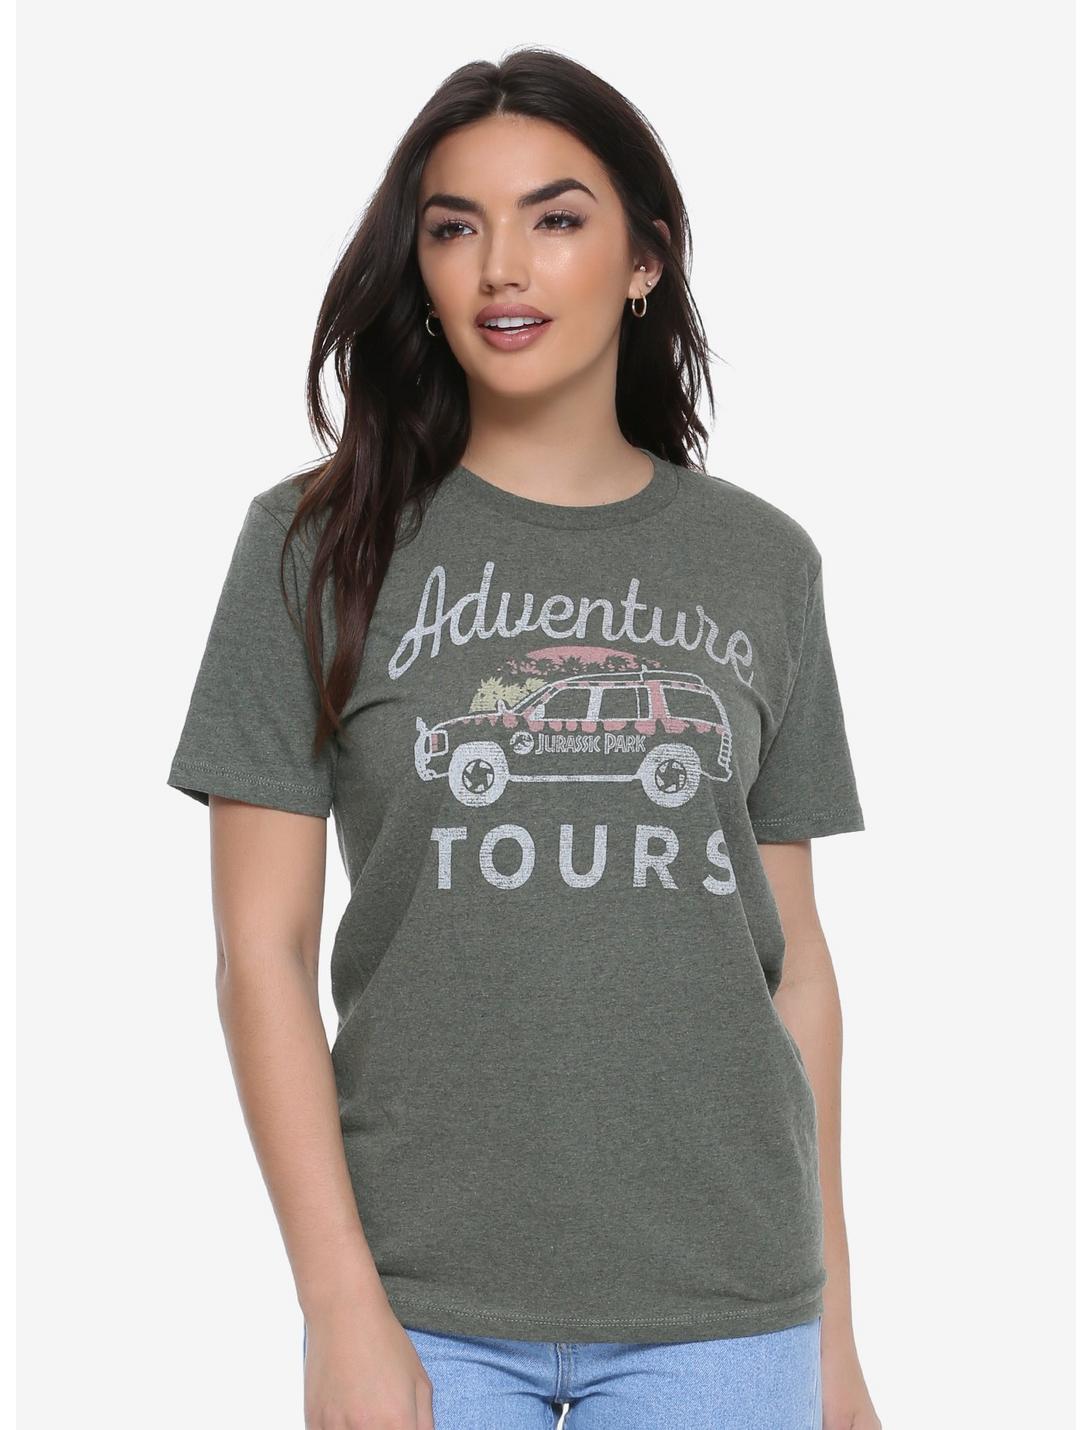 Jurassic Park Adventure Tours Womens Tee - BoxLunch Exclusive, OLIVE, hi-res